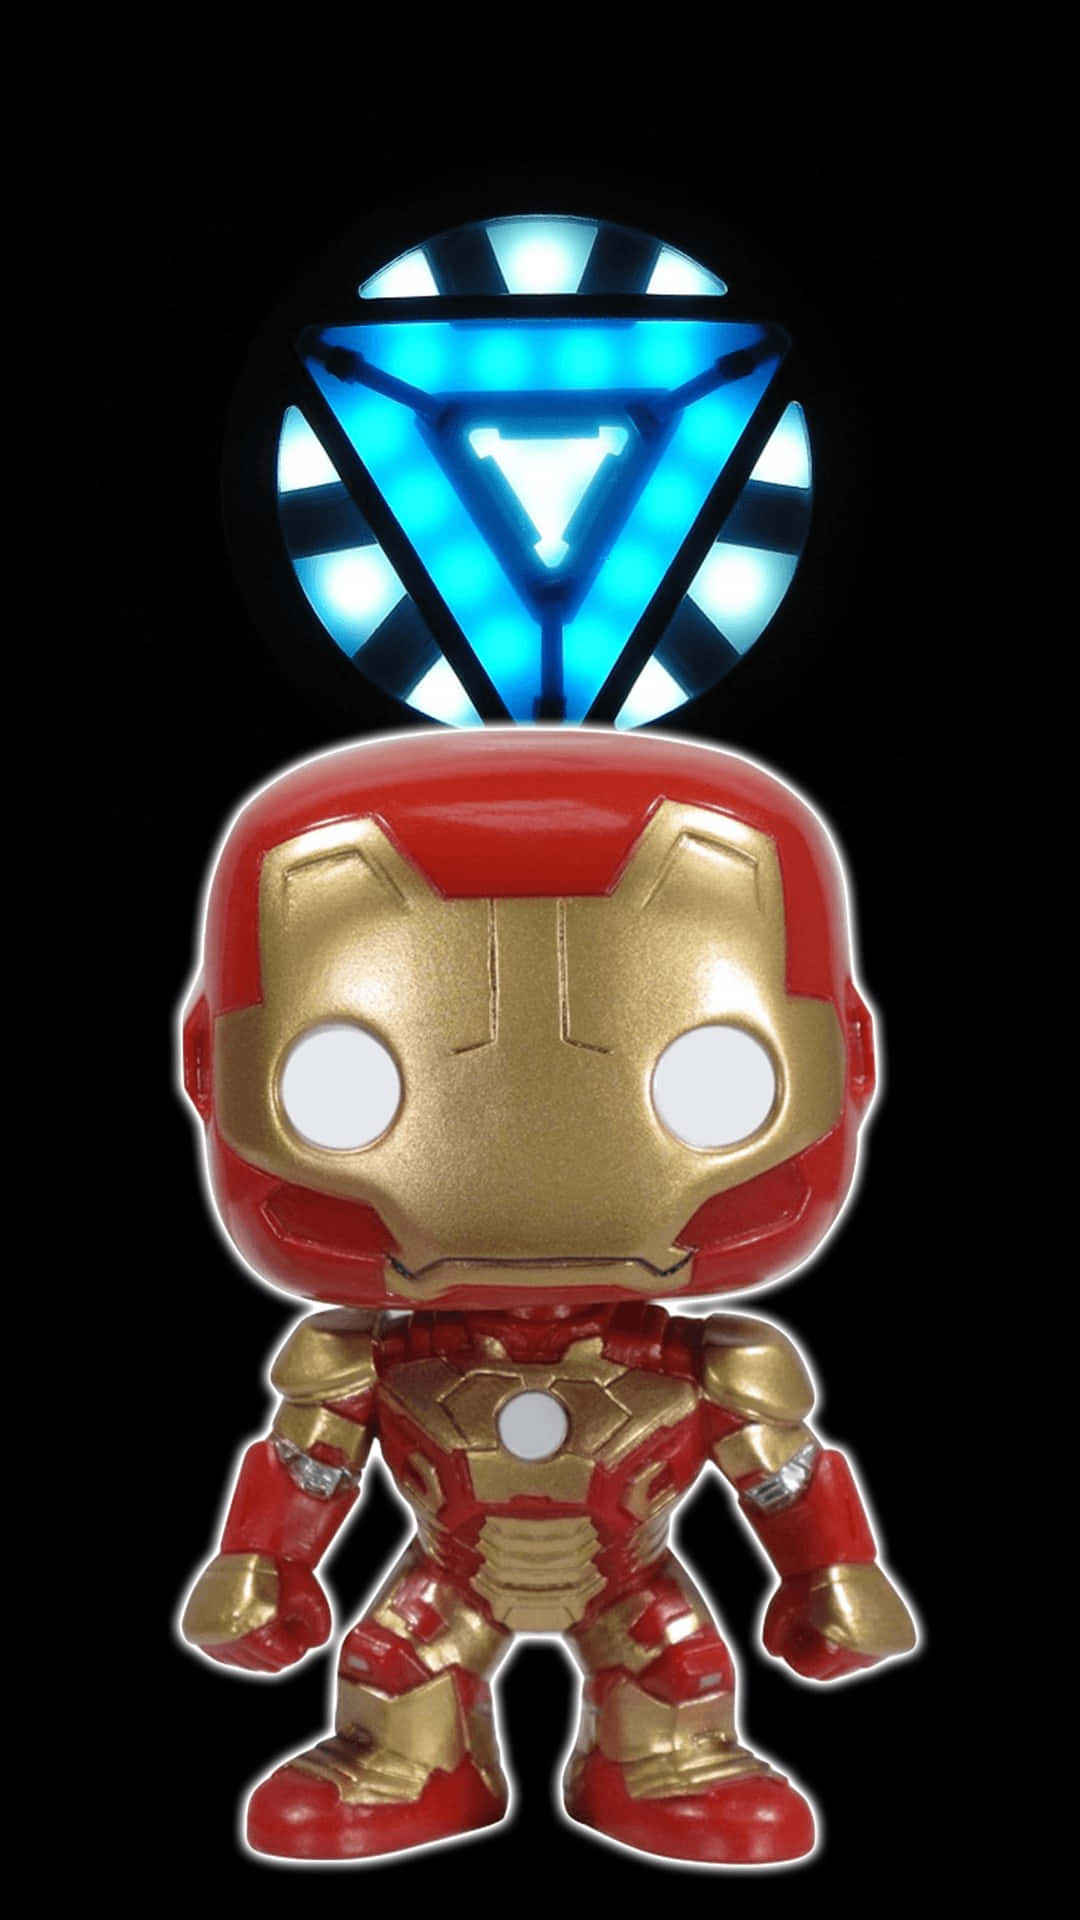 Iron Man Pop Figures Are Here to Save The Day! Wallpaper